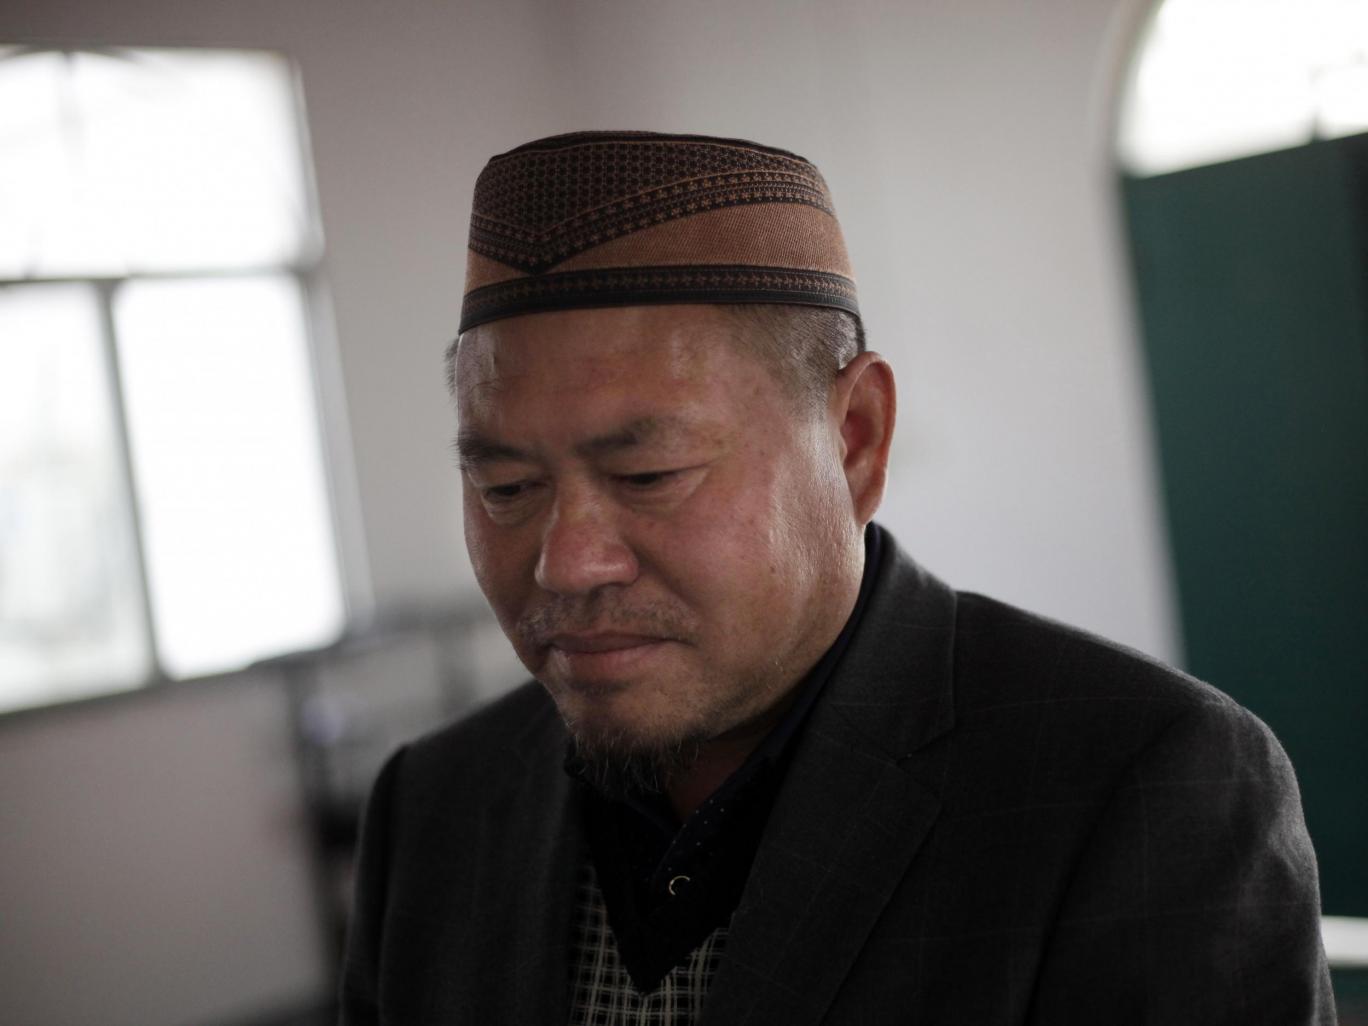 Islamophobia in China on the rise fueled by online hate speech